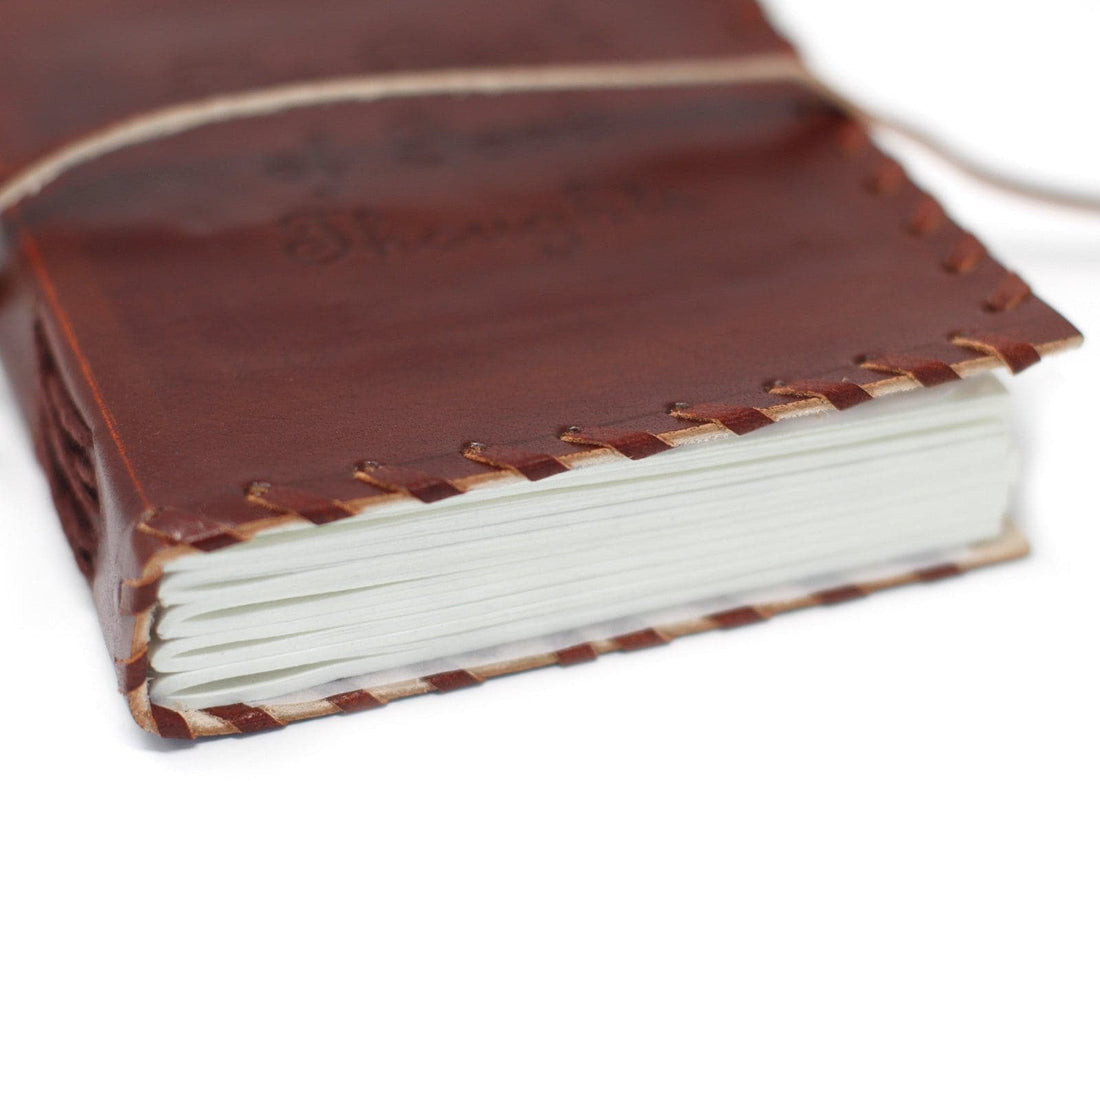 Leather Book of Thoughts with Wrap Notebook (15x10") - best price from Maltashopper.com LBN-07